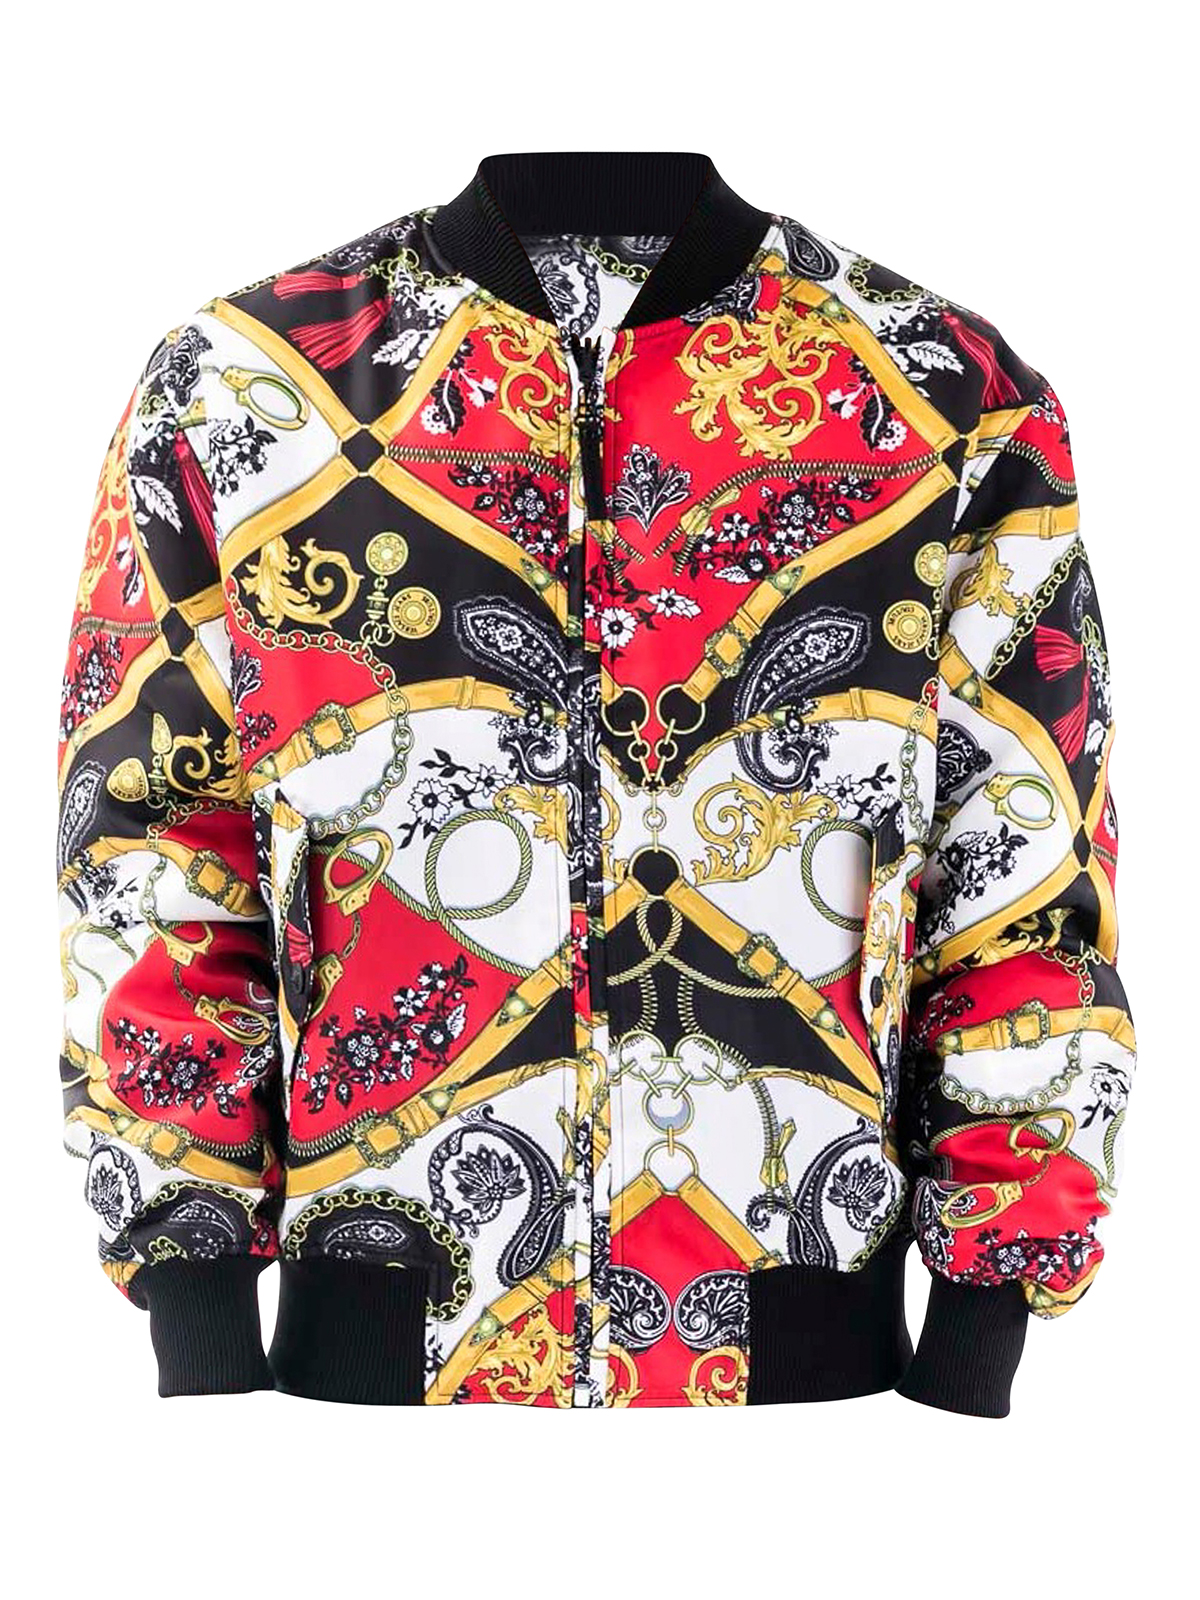 versace jeans bomber